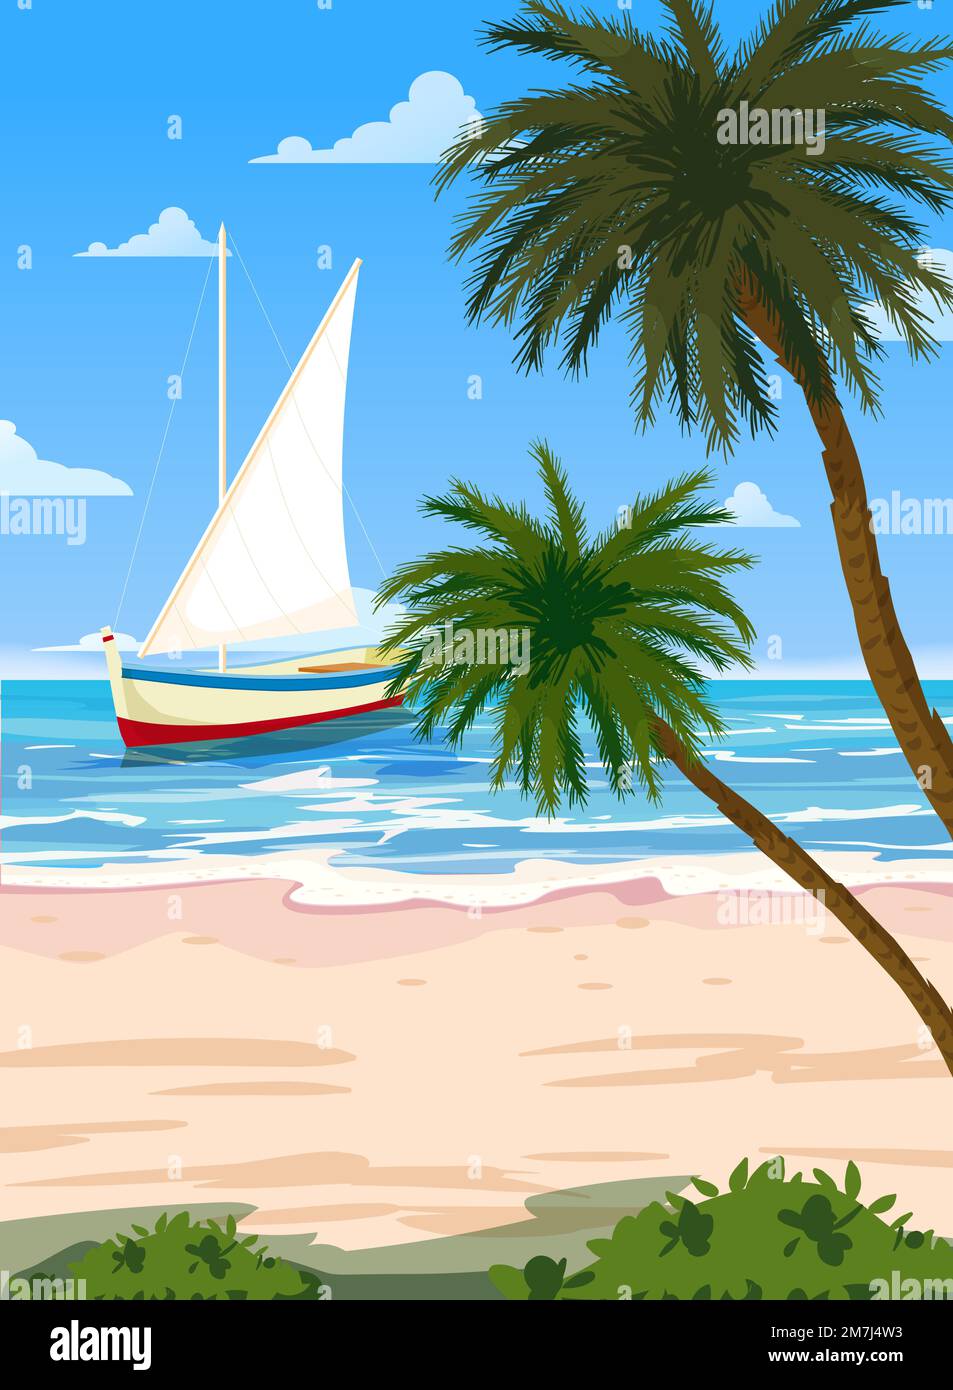 Poster Travel, Tropical seascape, beach, palms, sailboat, poster, seaside view landscape. Vintage style Stock Vector